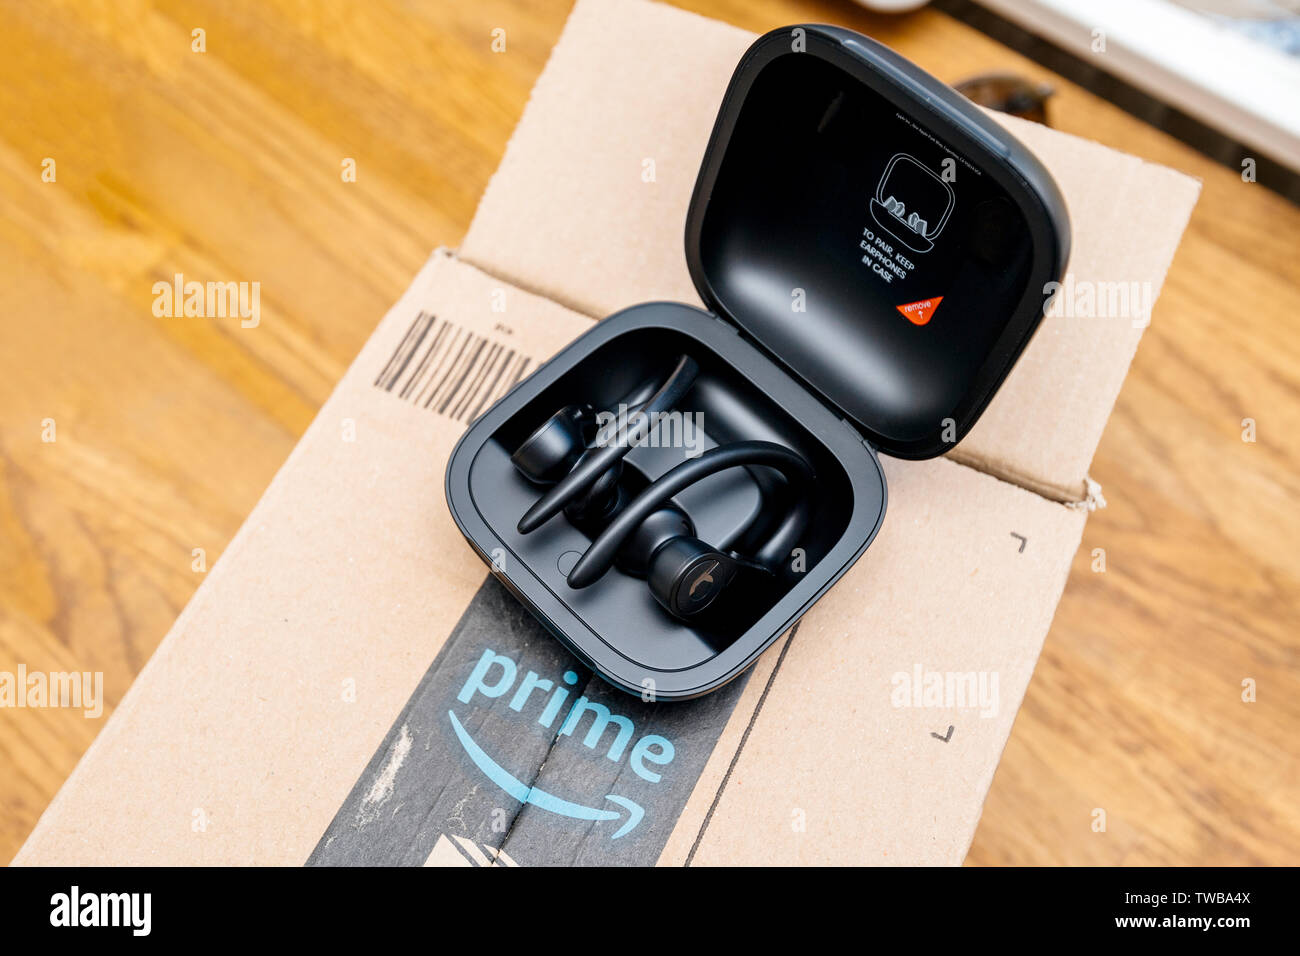 Paris, France - Jun 17, 2019: wooden table with Amazon Prime cardboard parcel and Powerbeats Pro Beats by Dr Dre wireless high-performance earphones waterproof and workout professional headphones Stock Photo